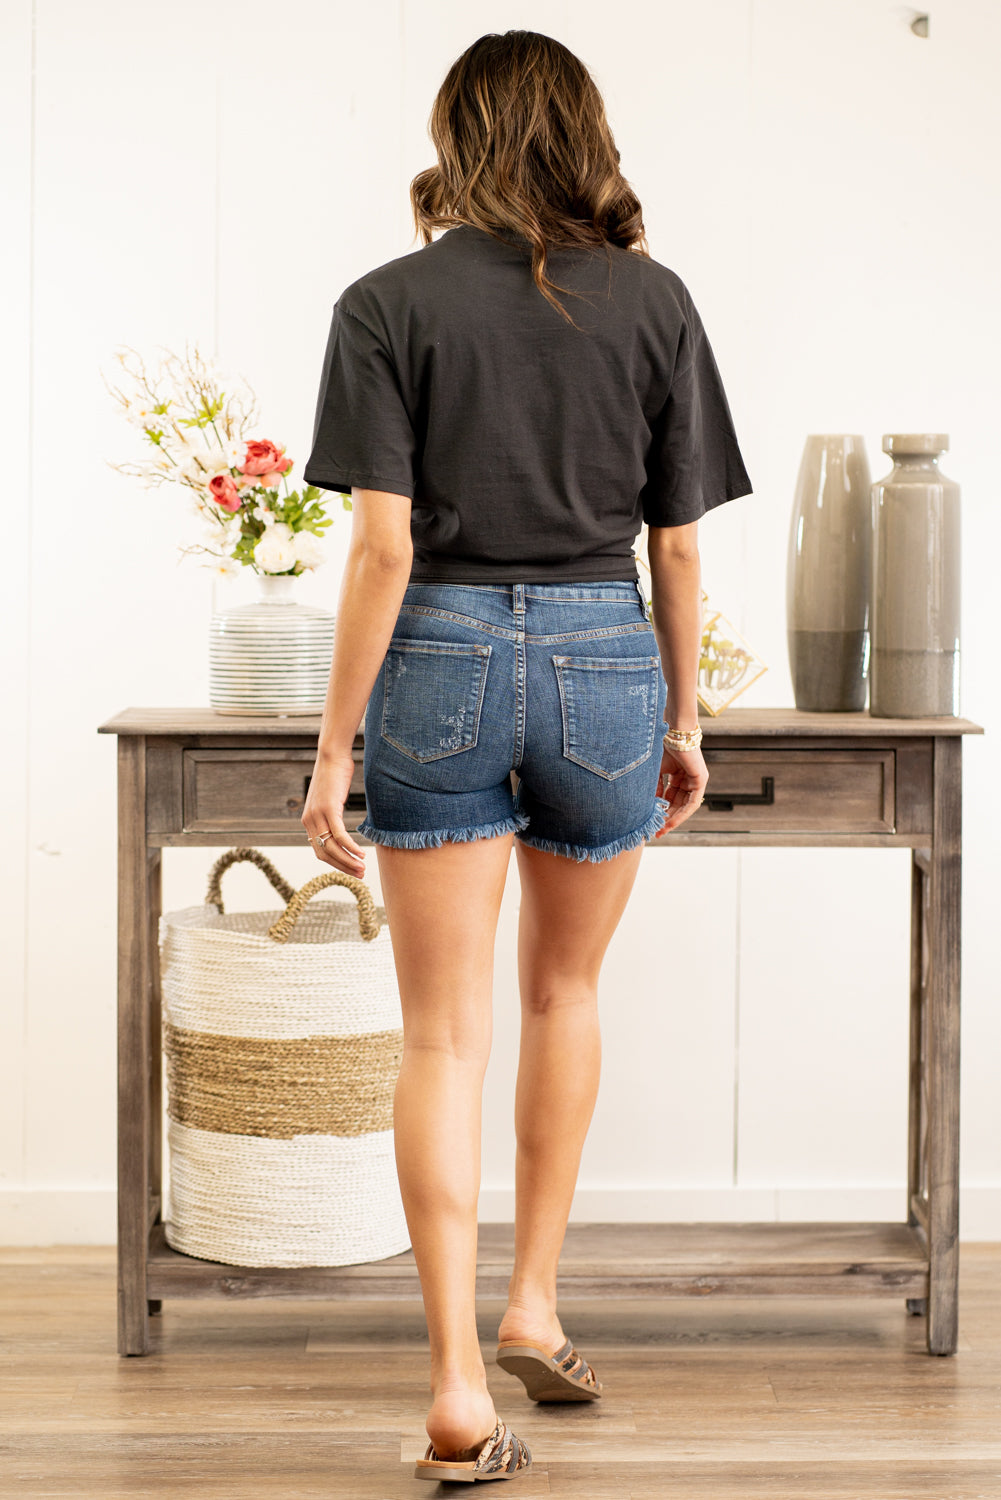 KanCan Jeans Collection: Spring 2021 Color: Dark Blue Shorts Cut: Shorts, 4.5" Inseam Rise: High Rise, 9.75" Front Rise 98%COTTON 2%SPANDEX Stitching: Classic Fly: Zip Fly  Style #: KC8607D Contact us for any additional measurements or sizing.  Taylor wears a size 3 in jeans, a small top, and 8.5 in shoes. She is wearing a size small in these shorts.